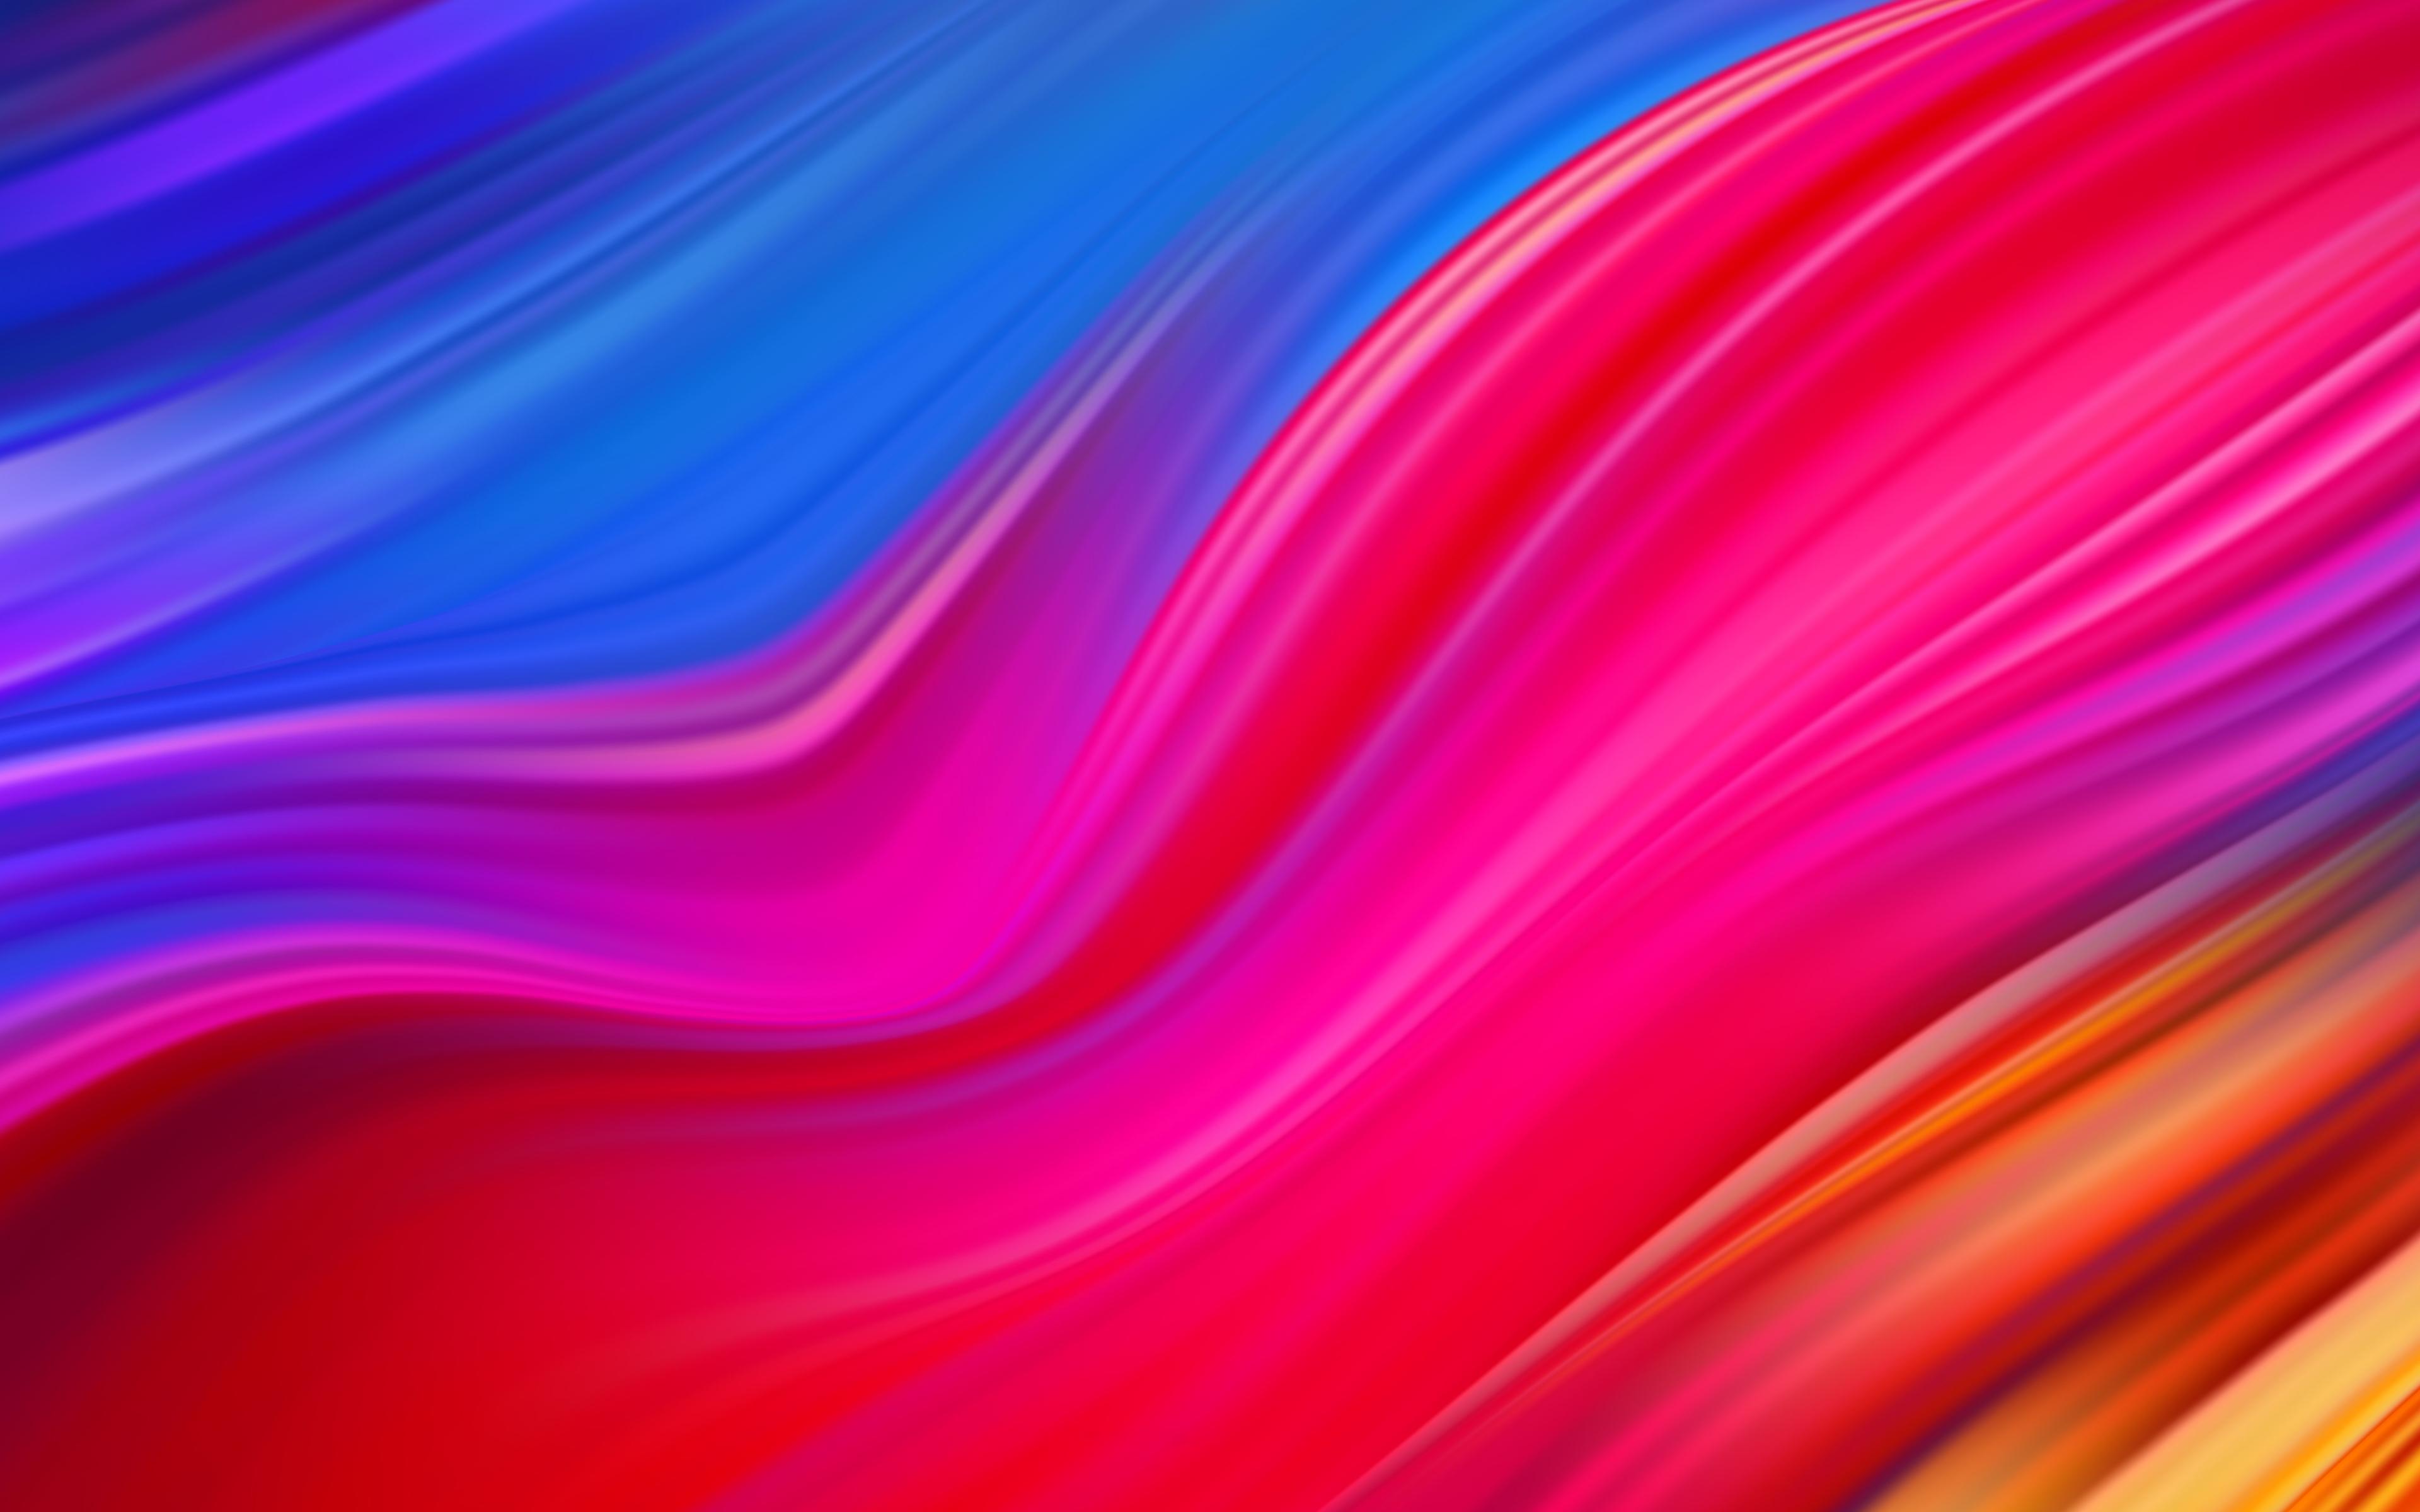 Download wallpaper 4k, colorful abstract waves, creative, waves